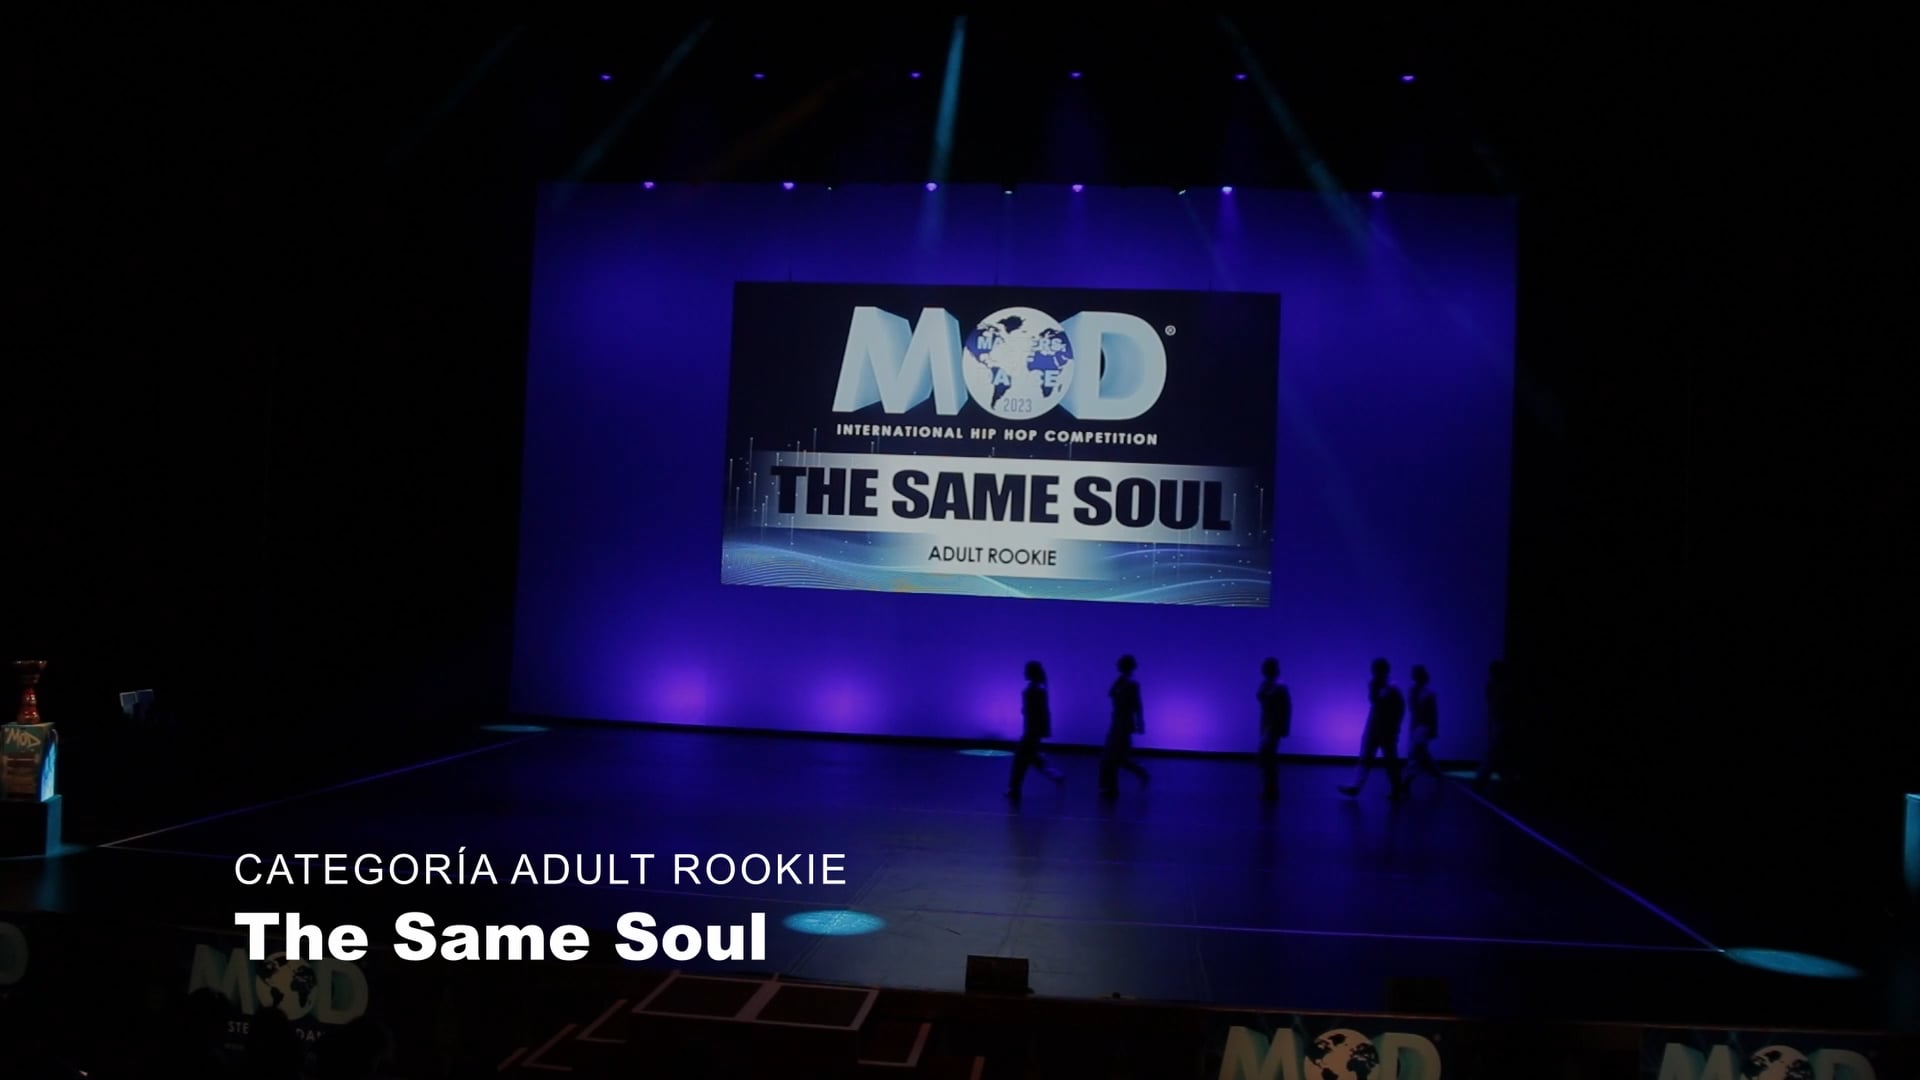 Adult Rookie – The Same Soul